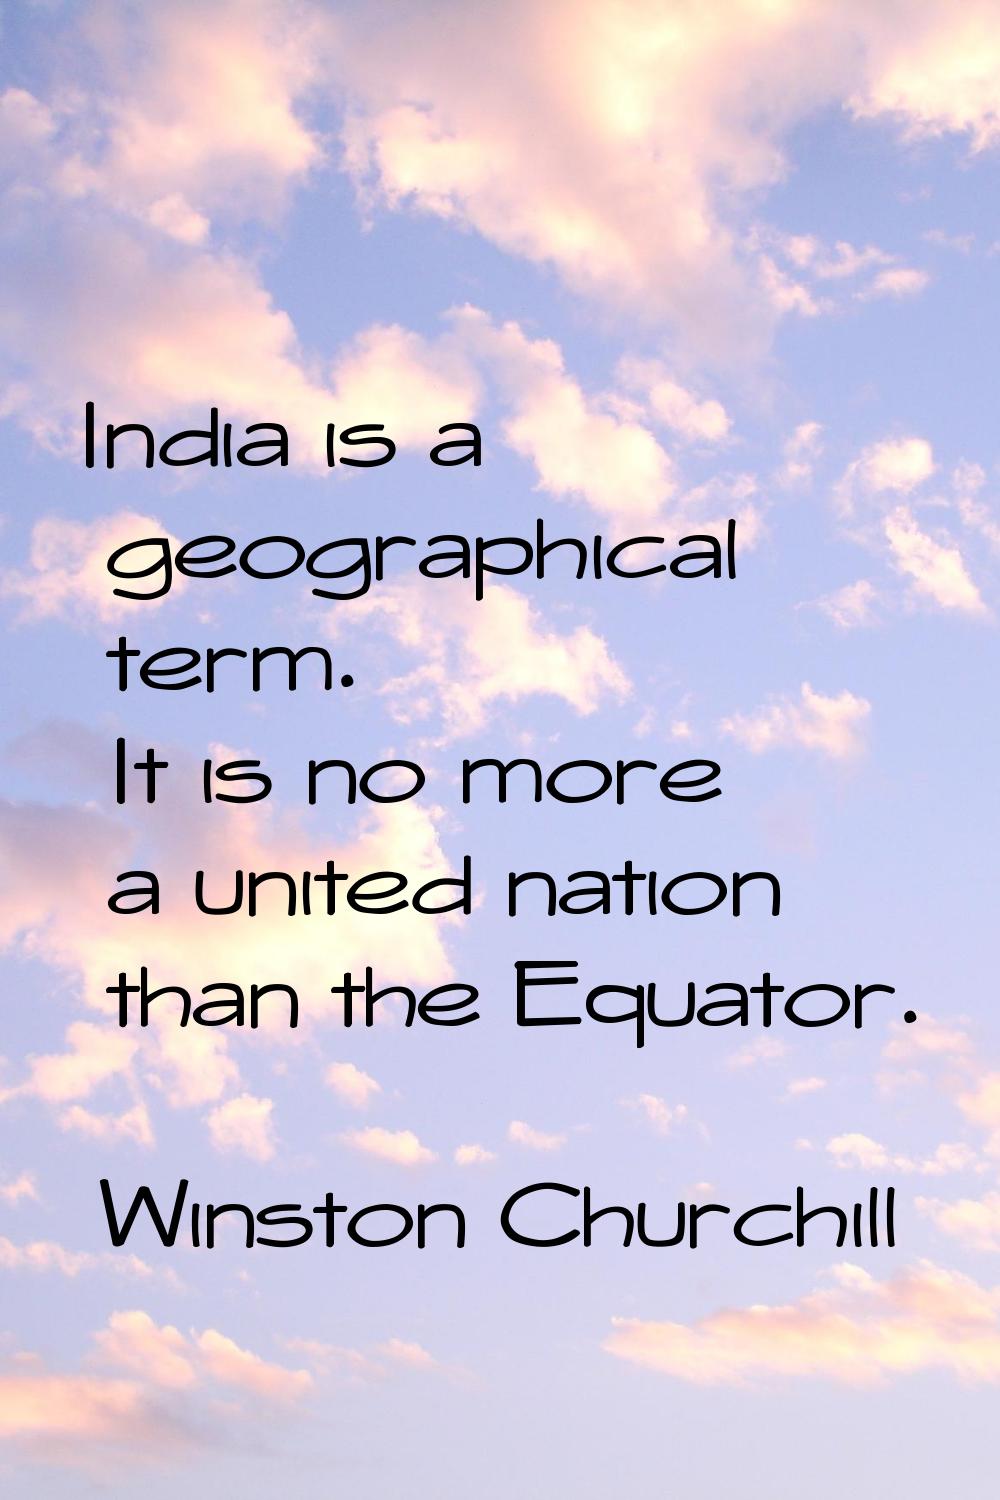 India is a geographical term. It is no more a united nation than the Equator.